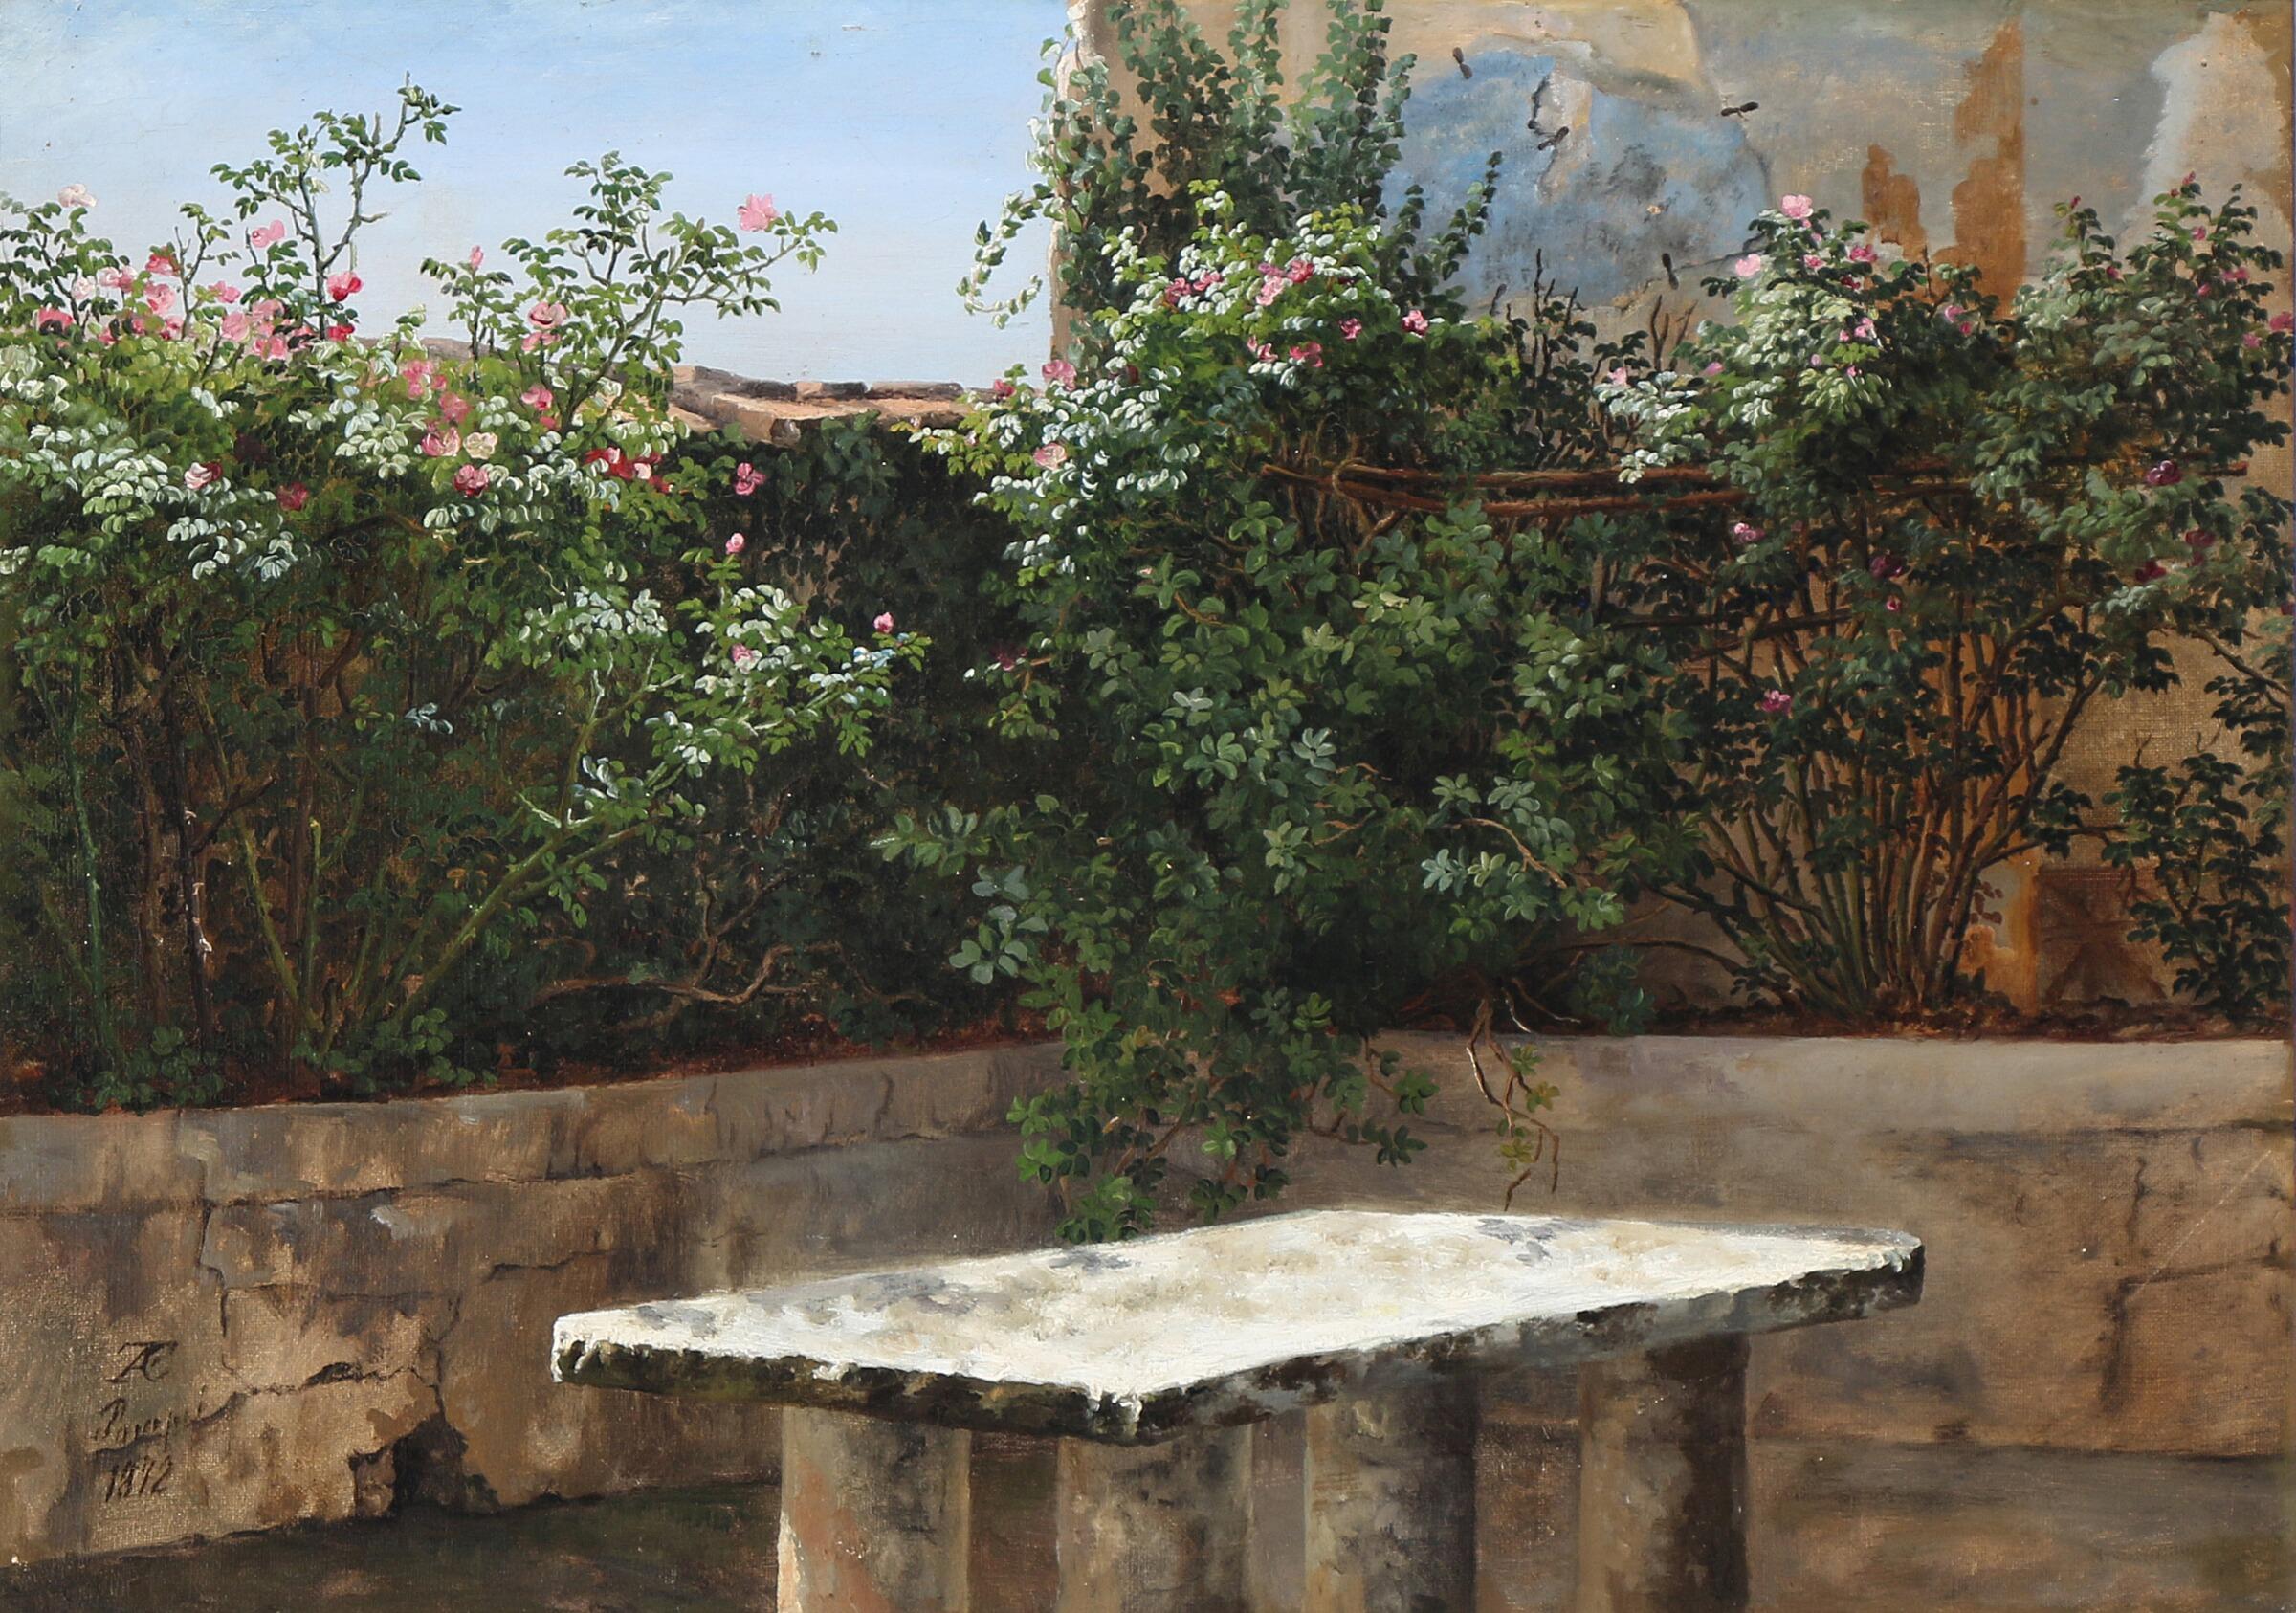 Anthonore Christensen was born in Copenhagen in 1849: Rose Garden, Pompei. Signed with monogram and dated Pompei 1872. Oil on canvas laid on cardboard
Anthonie Eleonore Christensen, generally known as Anthonore Christensen, née Tscherning was a